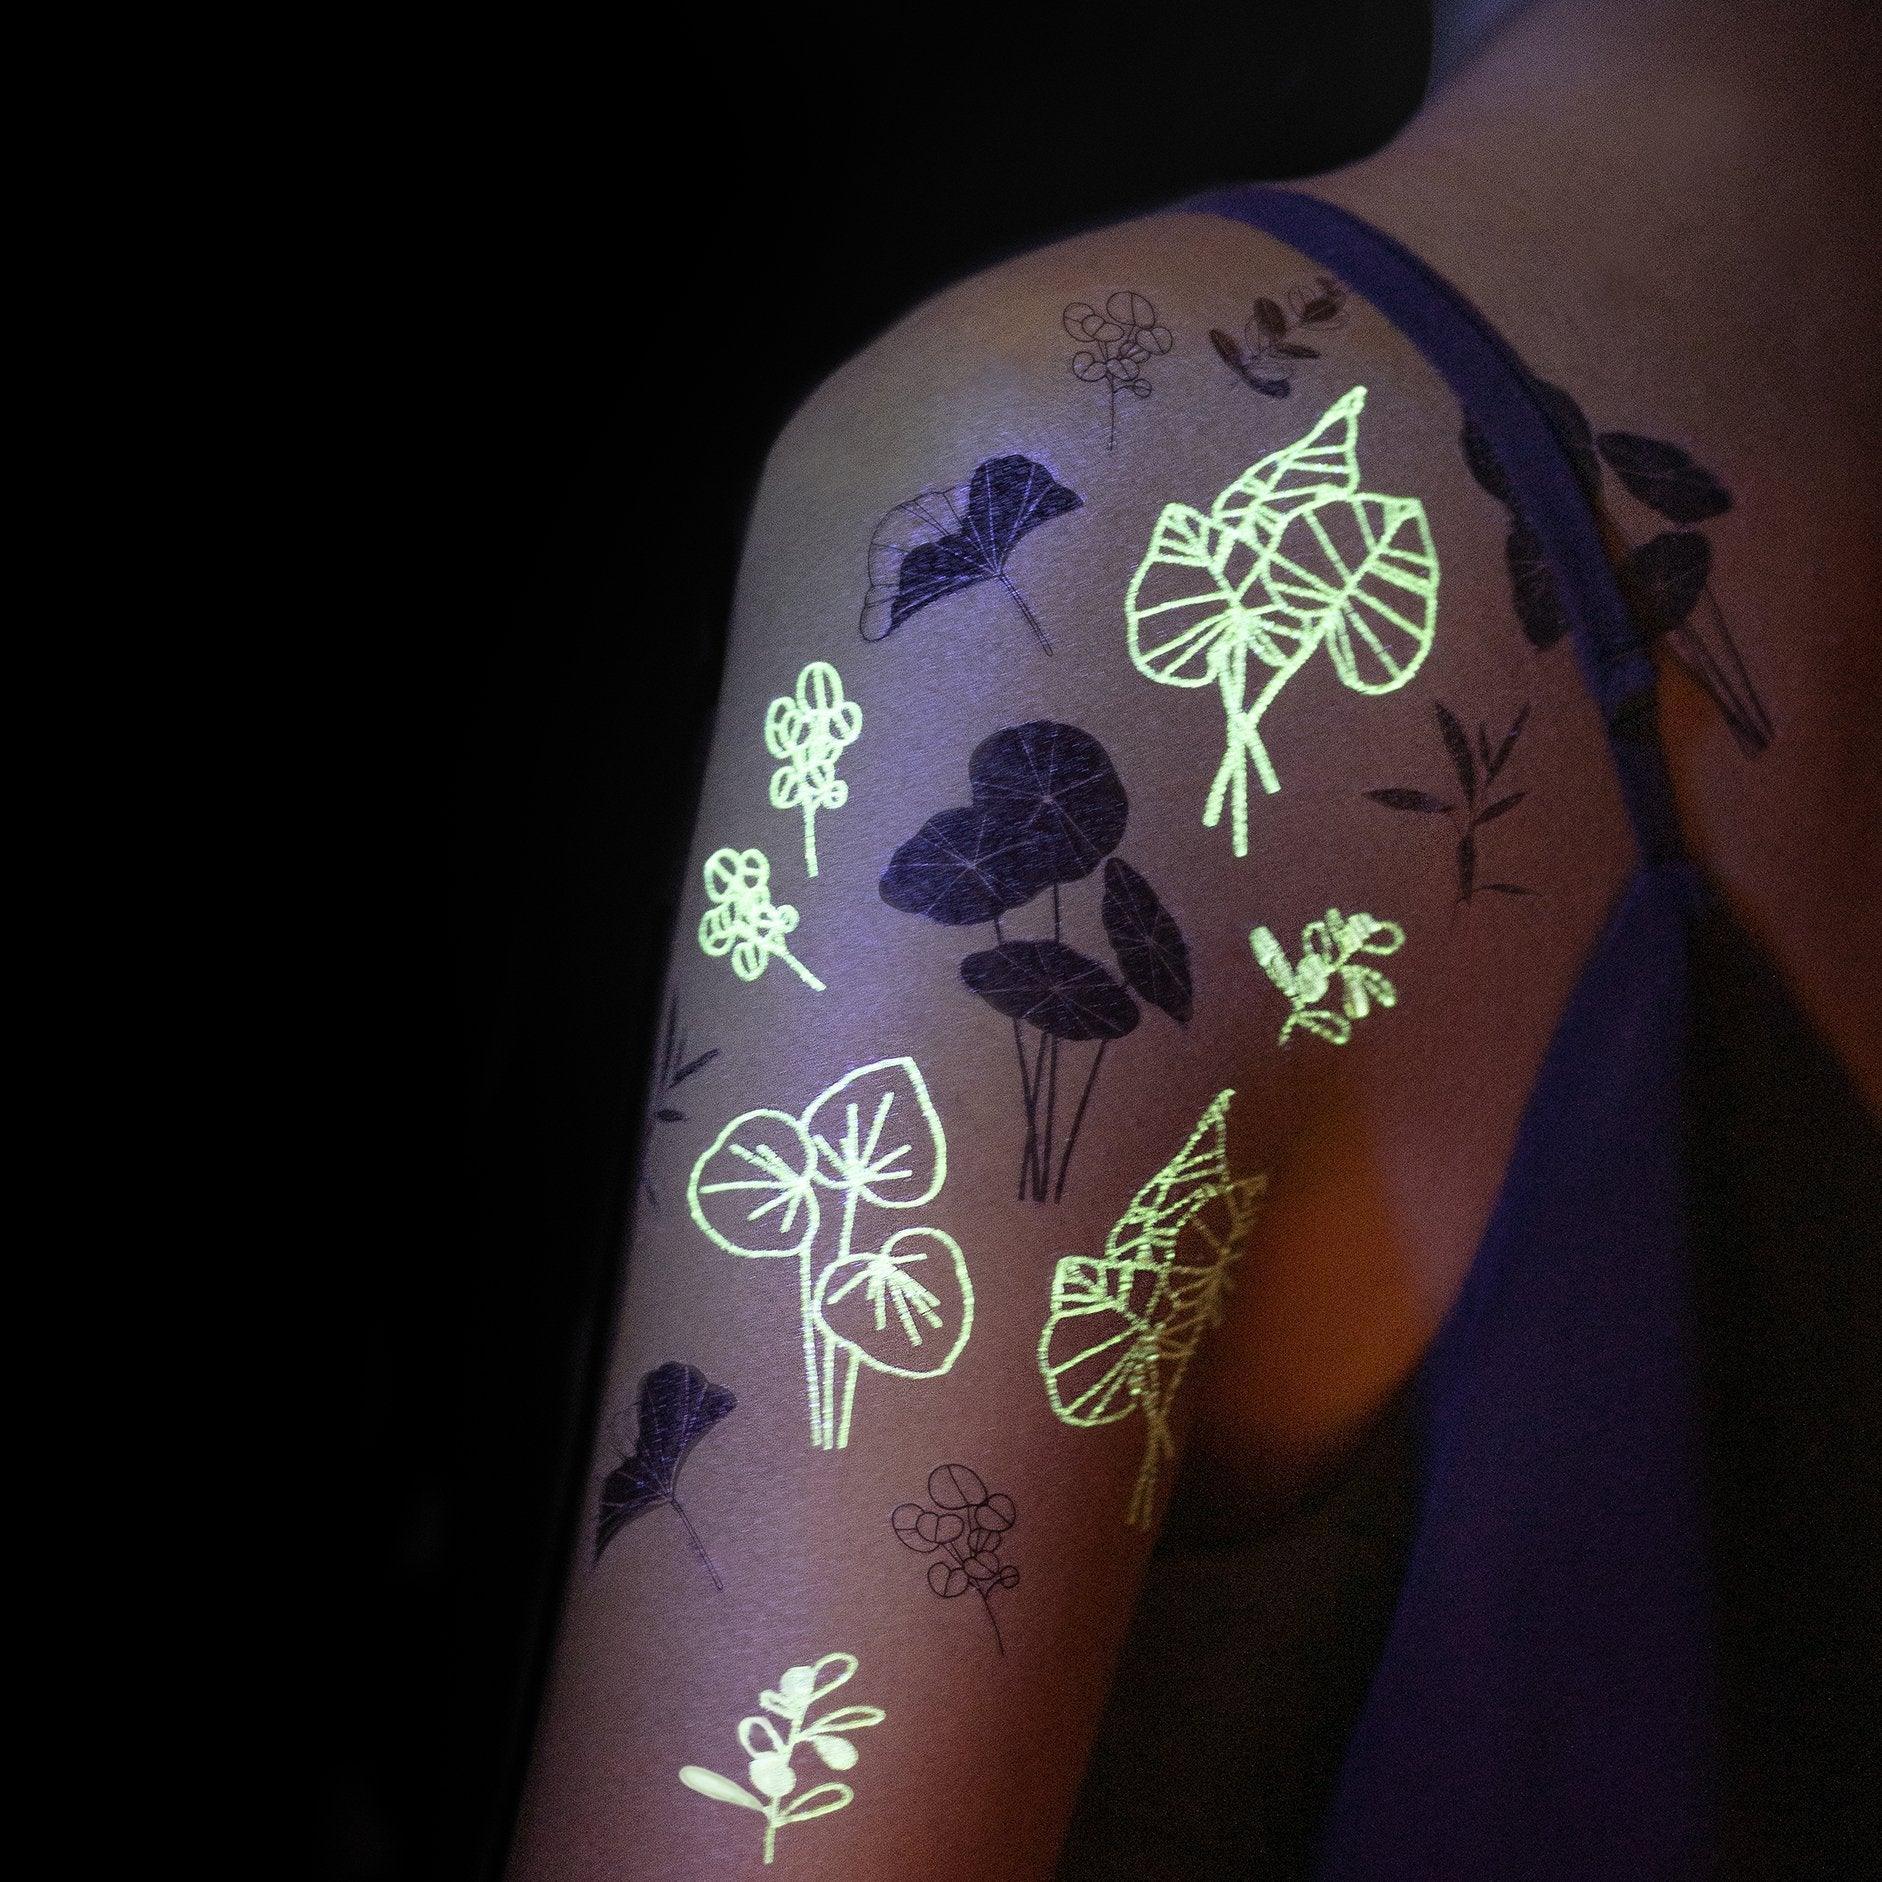 Glowing Garden (Glow in the Dark) Tattoo Sheet, Set of 2 - Why and Whale